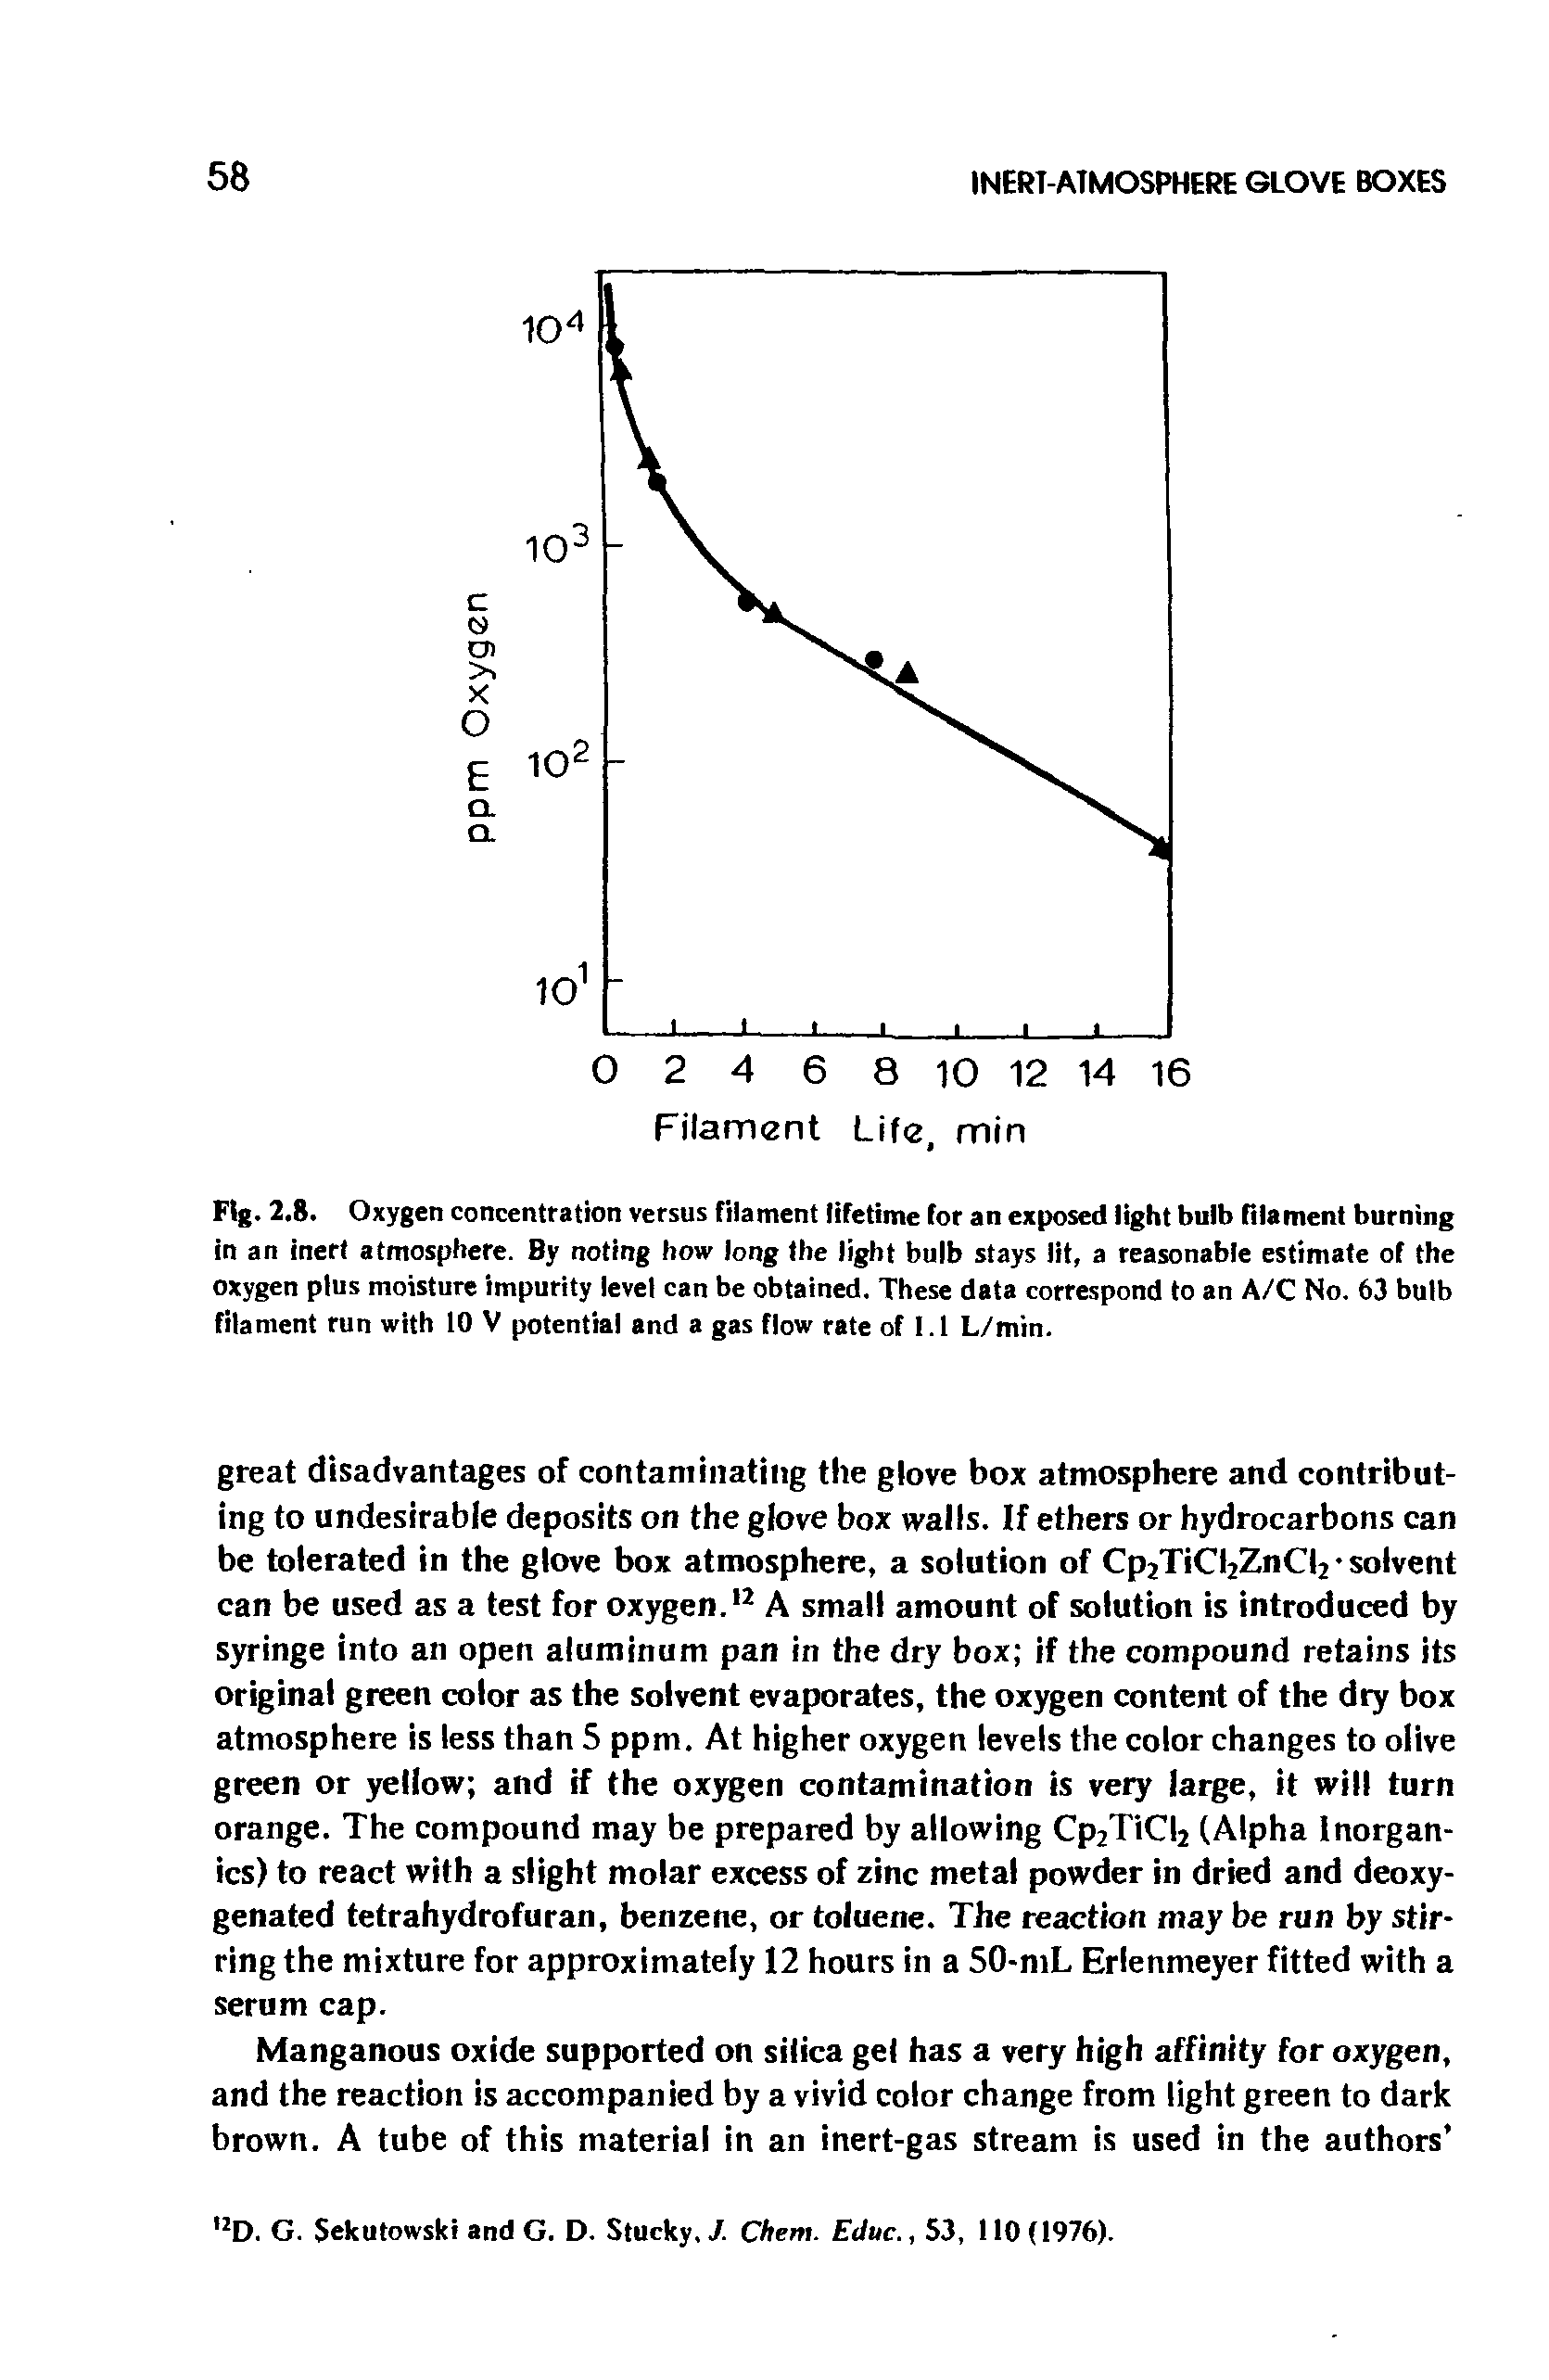 Fig. 2.8. Oxygen concentration versus filament lifetime for an exposed light bulb filament burning in an inert atmosphere. By noting how long the light bulb stays lit, a reasonable estimate of the oxygen plus moisture impurity level can be obtained. These data correspond to an A/C No. 63 bulb filament run with 10 V potential and a gas flow rate of 1.1 L/min.